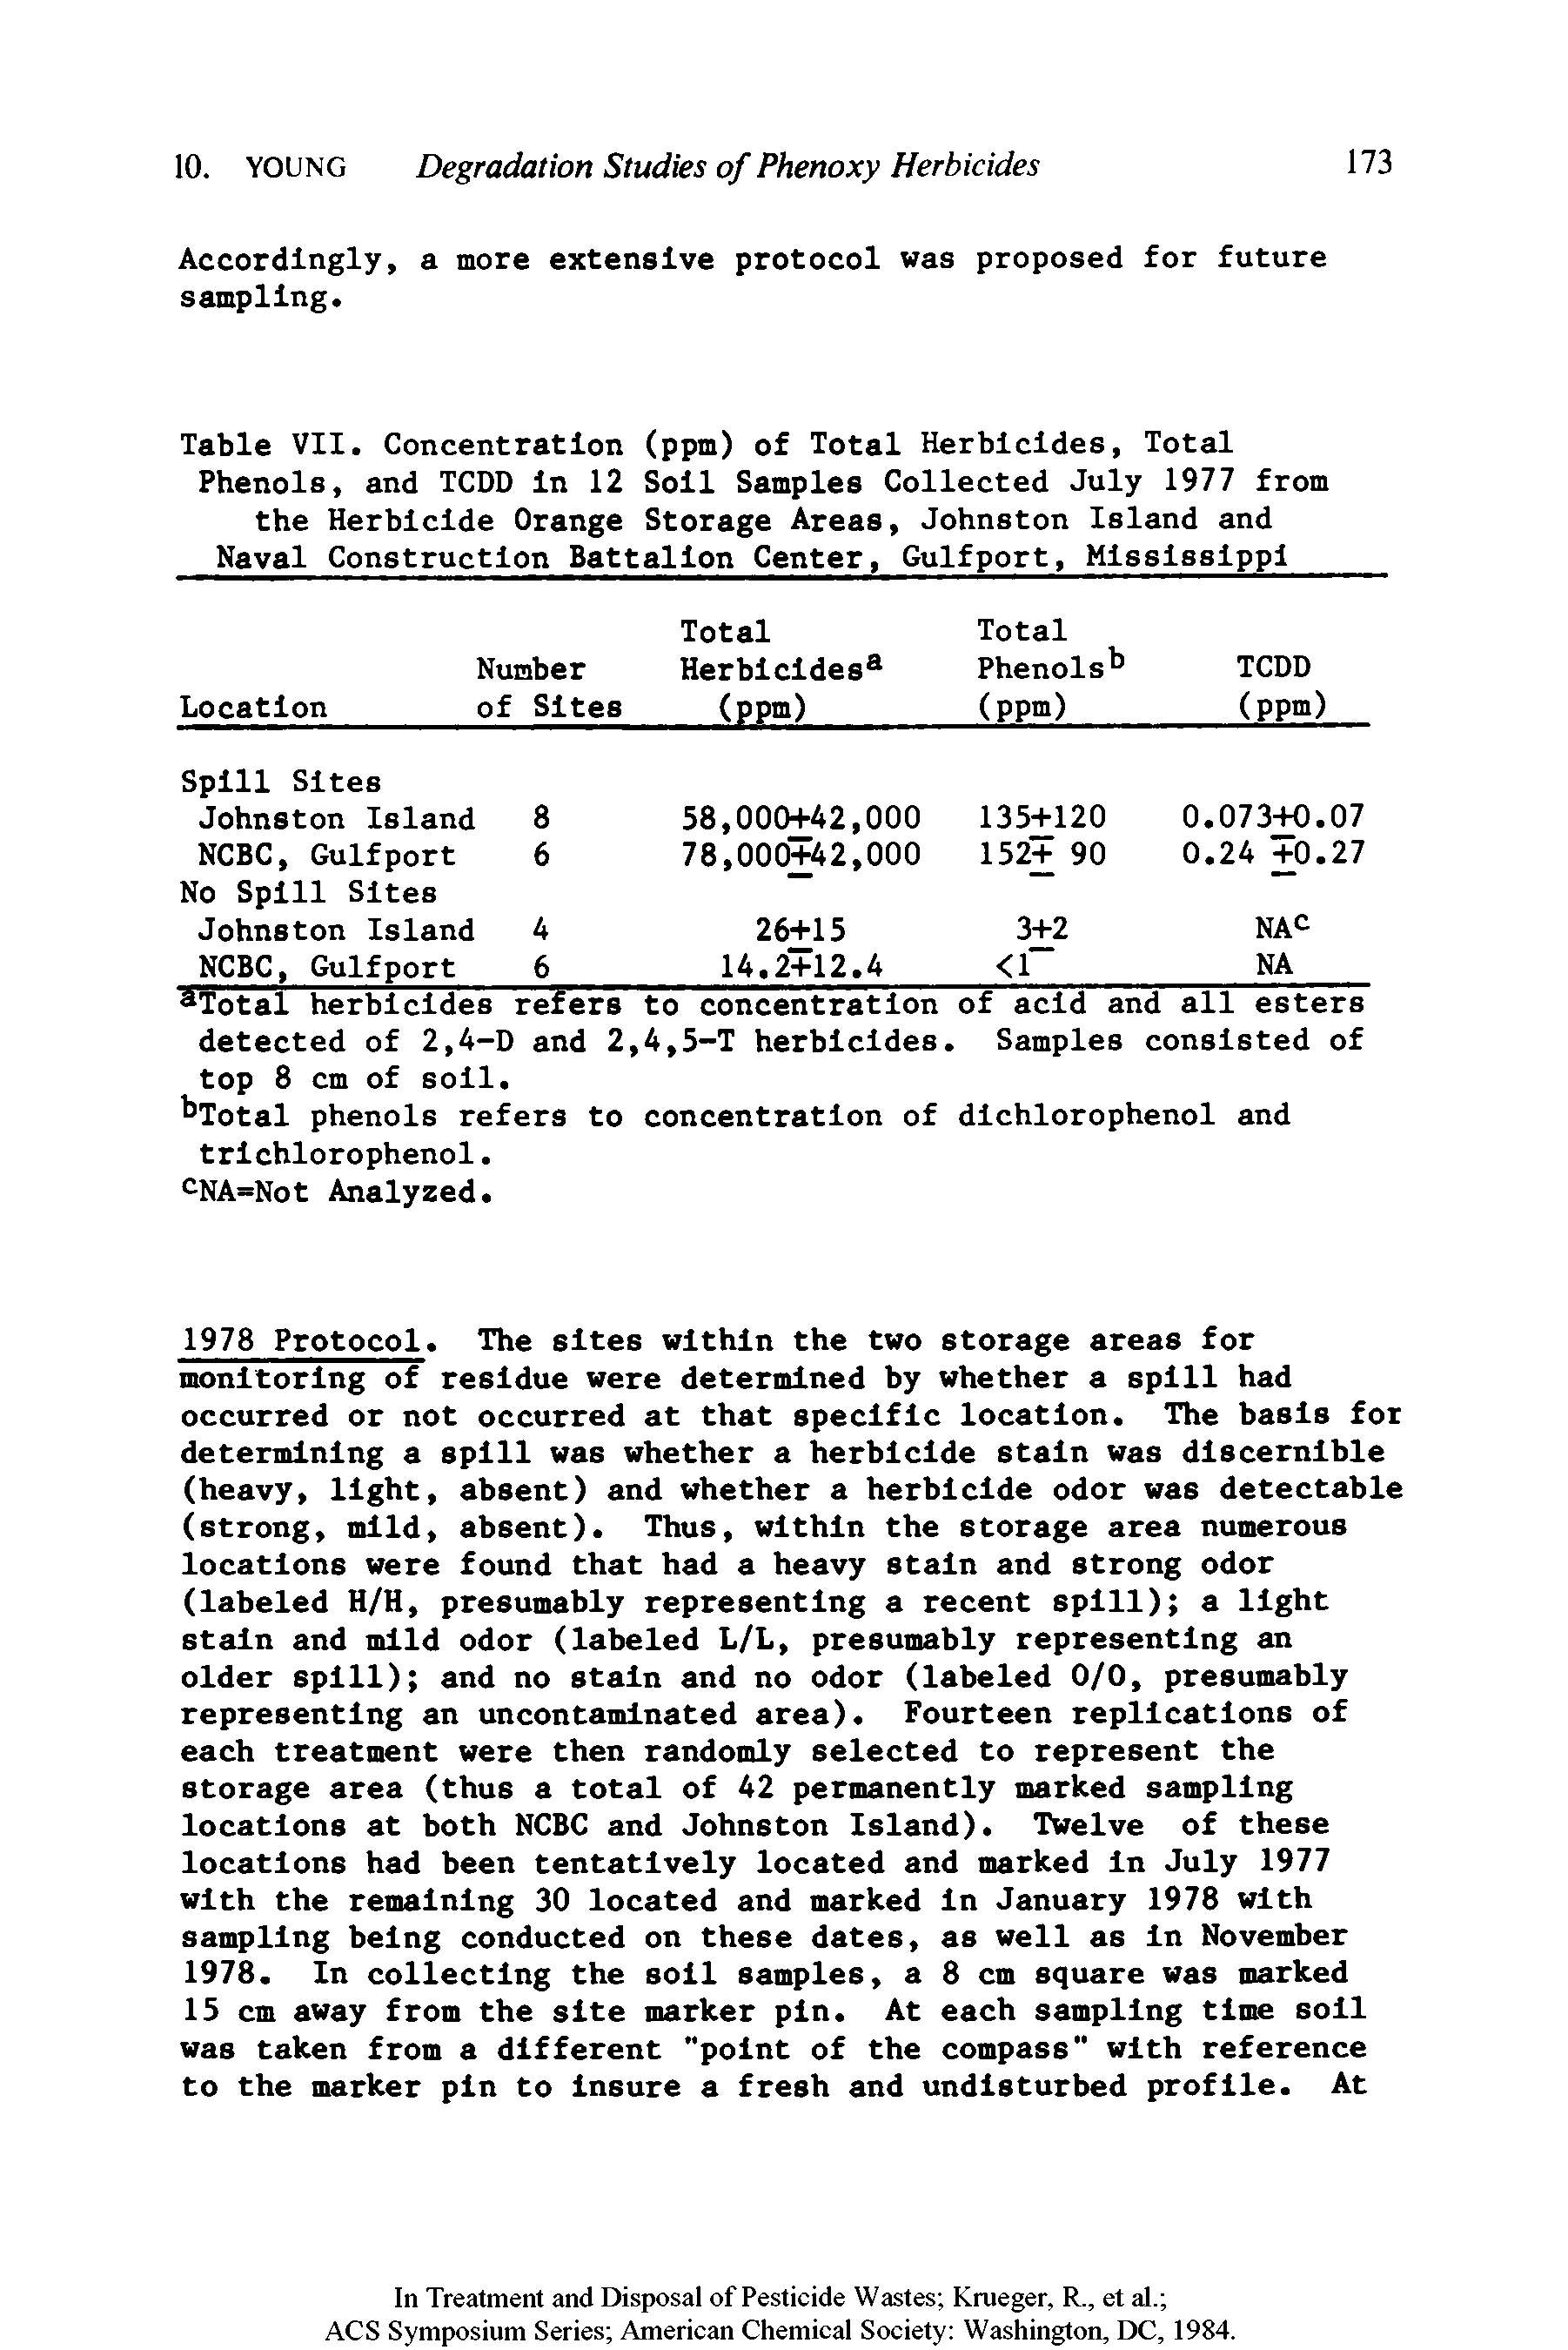 Table VII. Concentration (ppm) of Total Herbicides, Total Phenols, and TCDD In 12 Soil Samples Collected July 1977 from the Herbicide Orange Storage Areas, Johnston Island and...